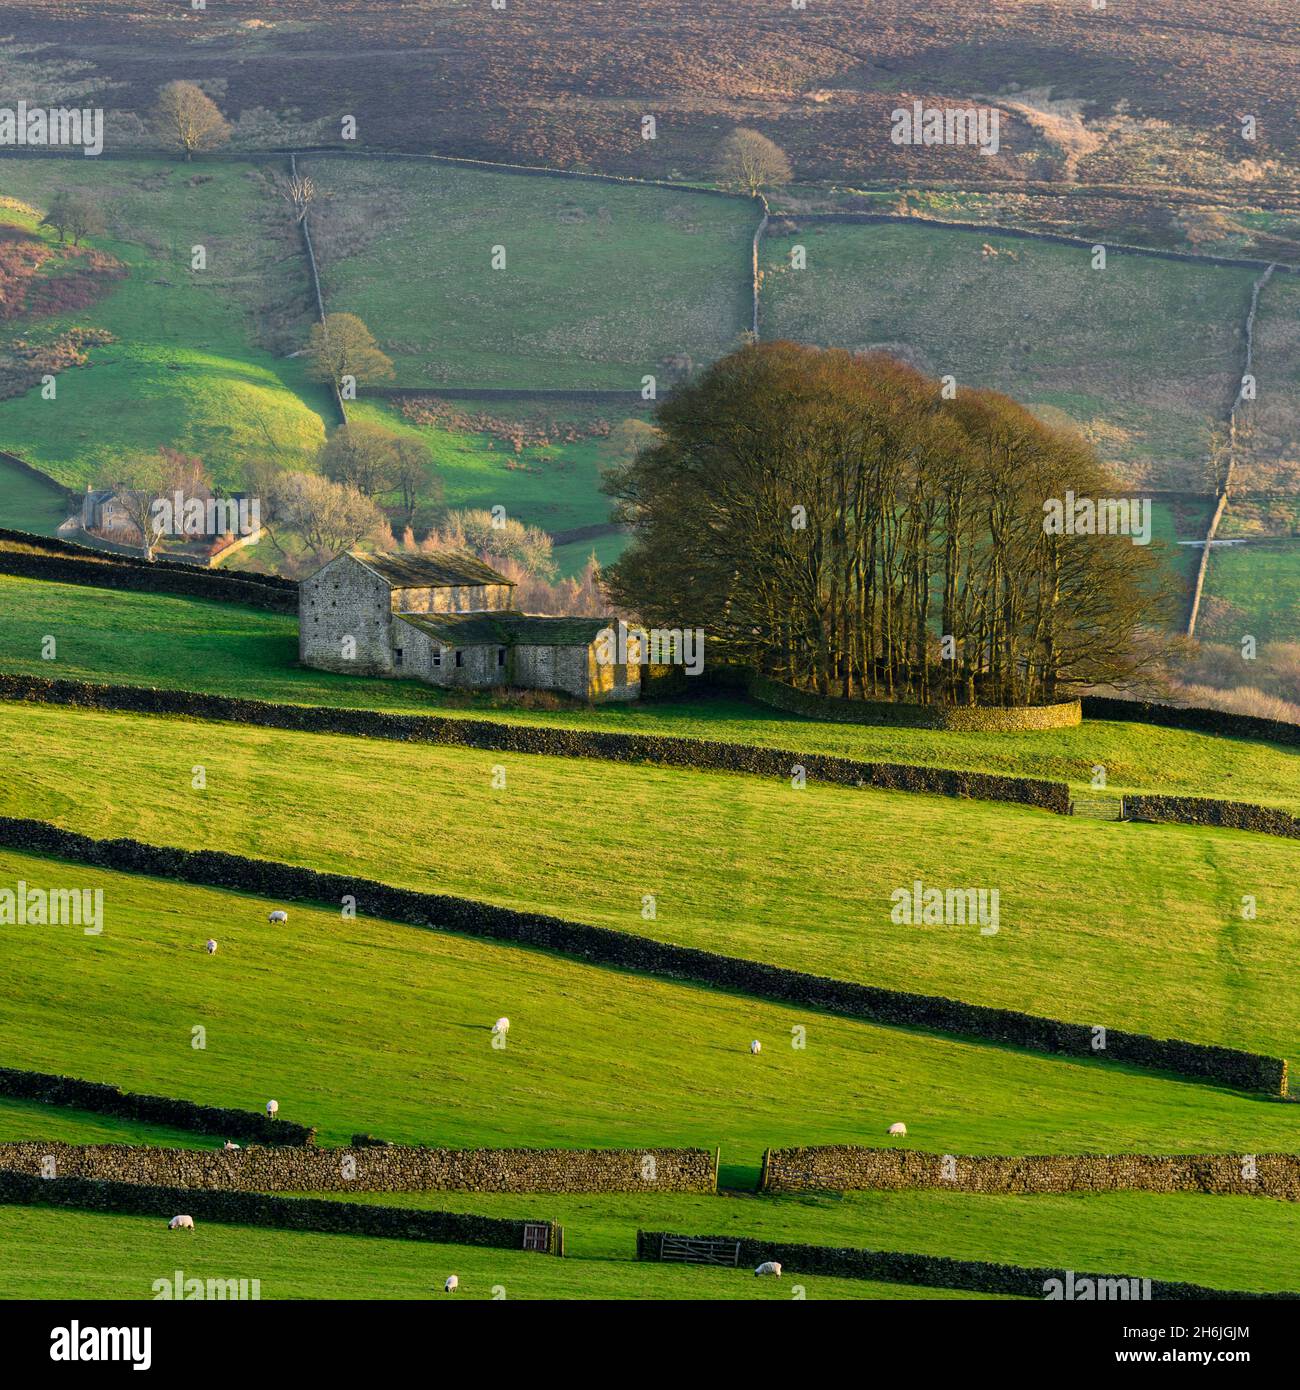 Beautiful scenic farmland (sunlit hill, group of hilltop trees, isolated farm buildings, valley hillsides, uplands) - Yorkshire Dales, England, UK. Stock Photo